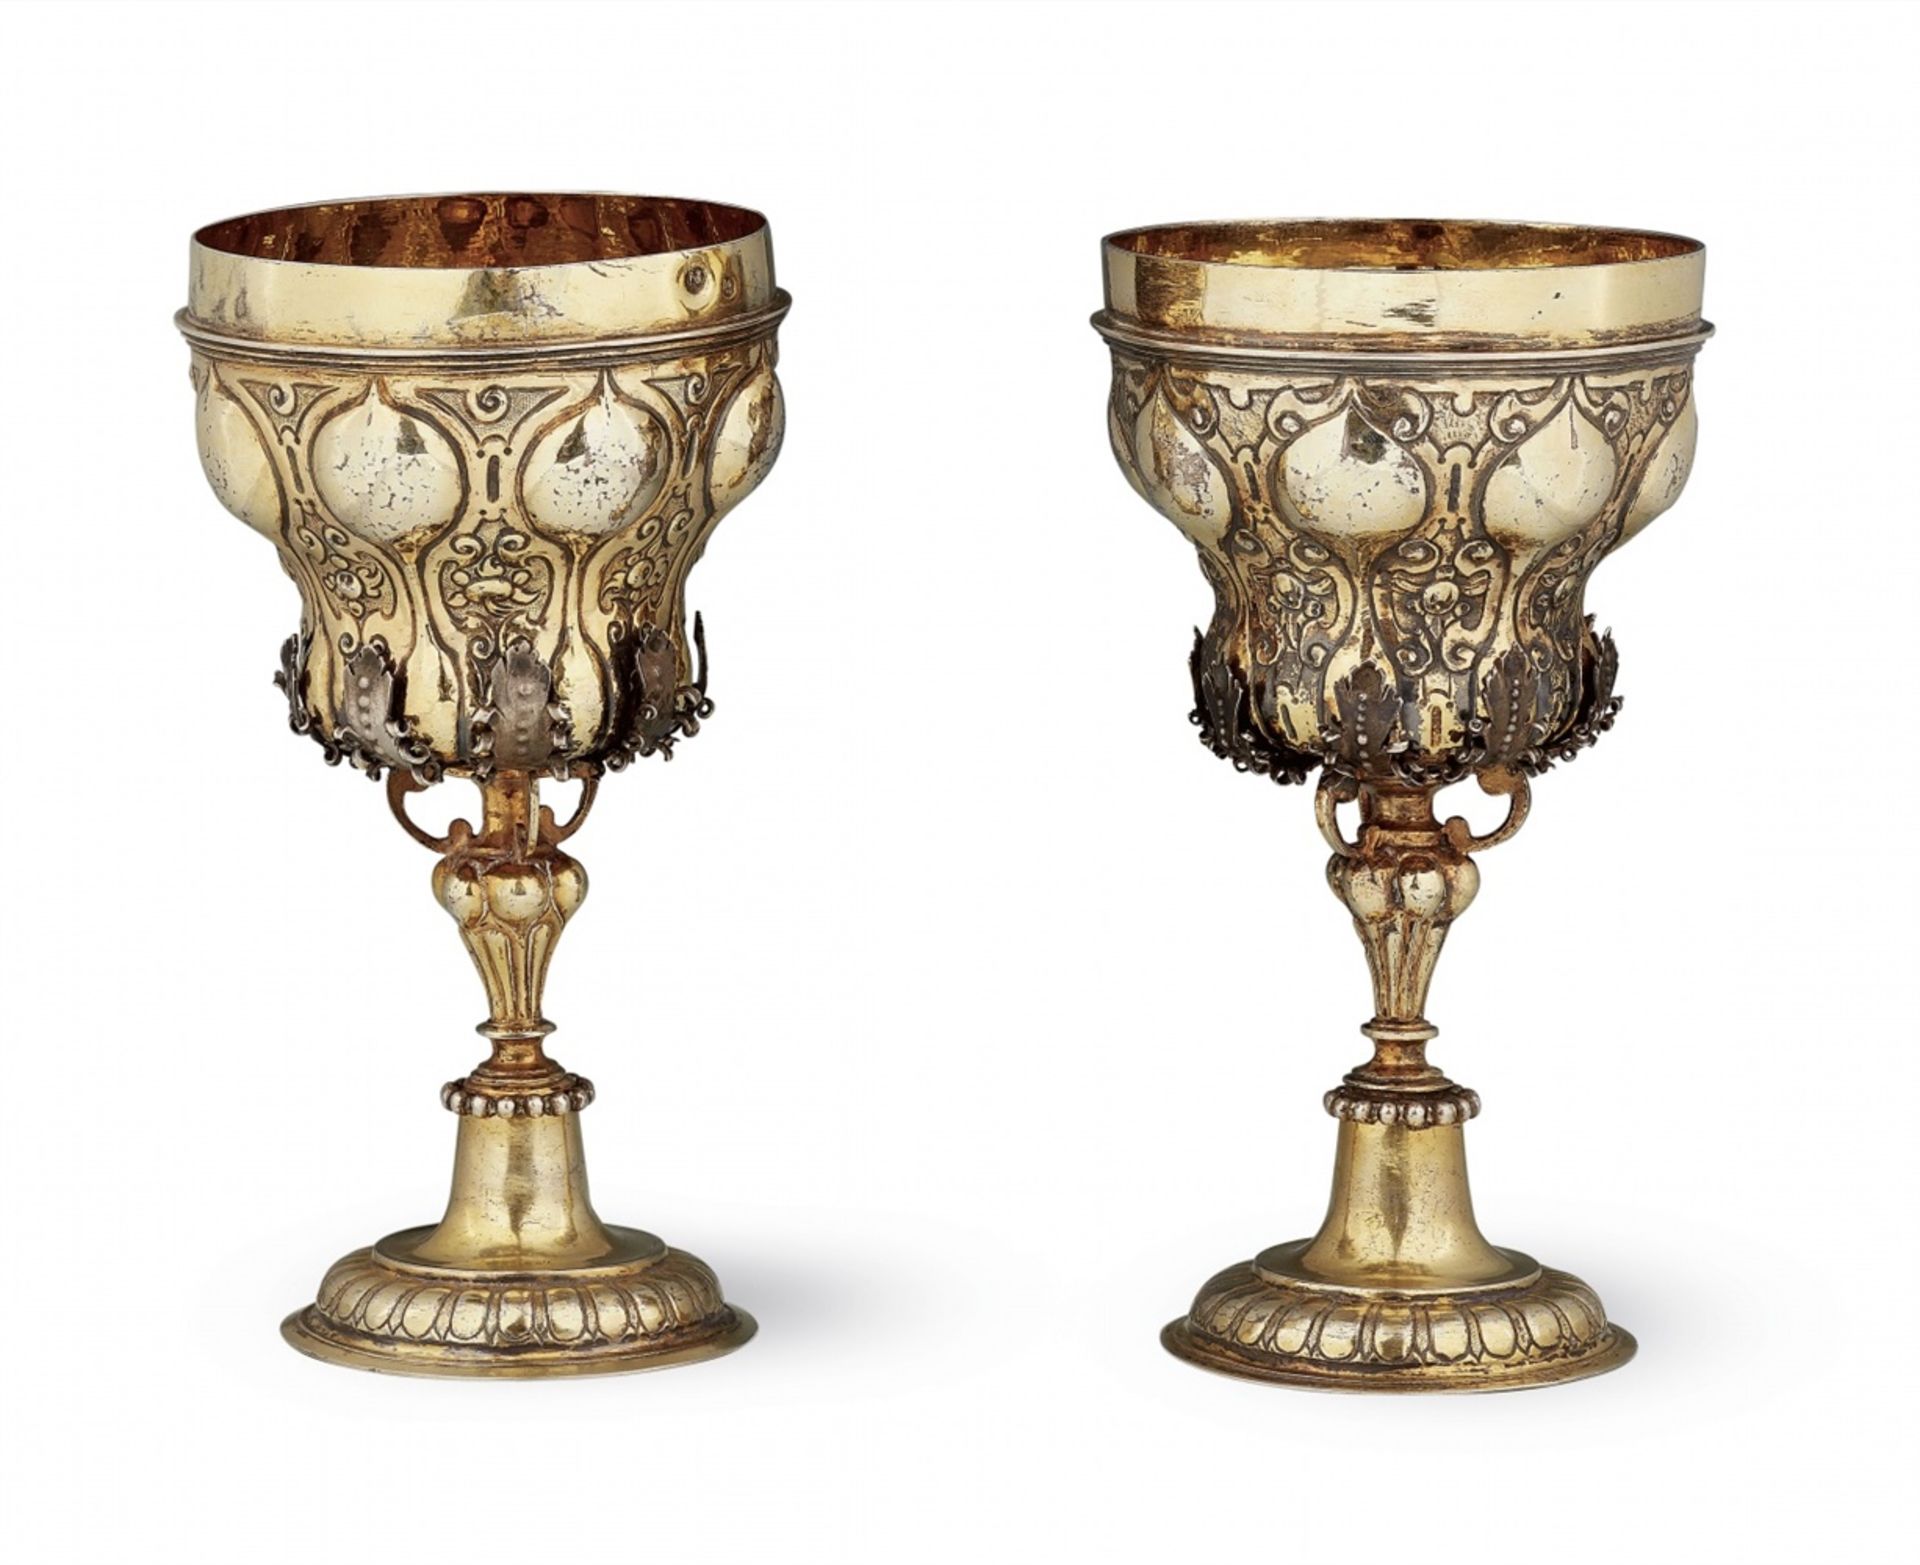 A Nuremberg silver nesting gobletSilver; gold-plated. Silver-gilt drinking chalice formed from two - Bild 2 aus 4